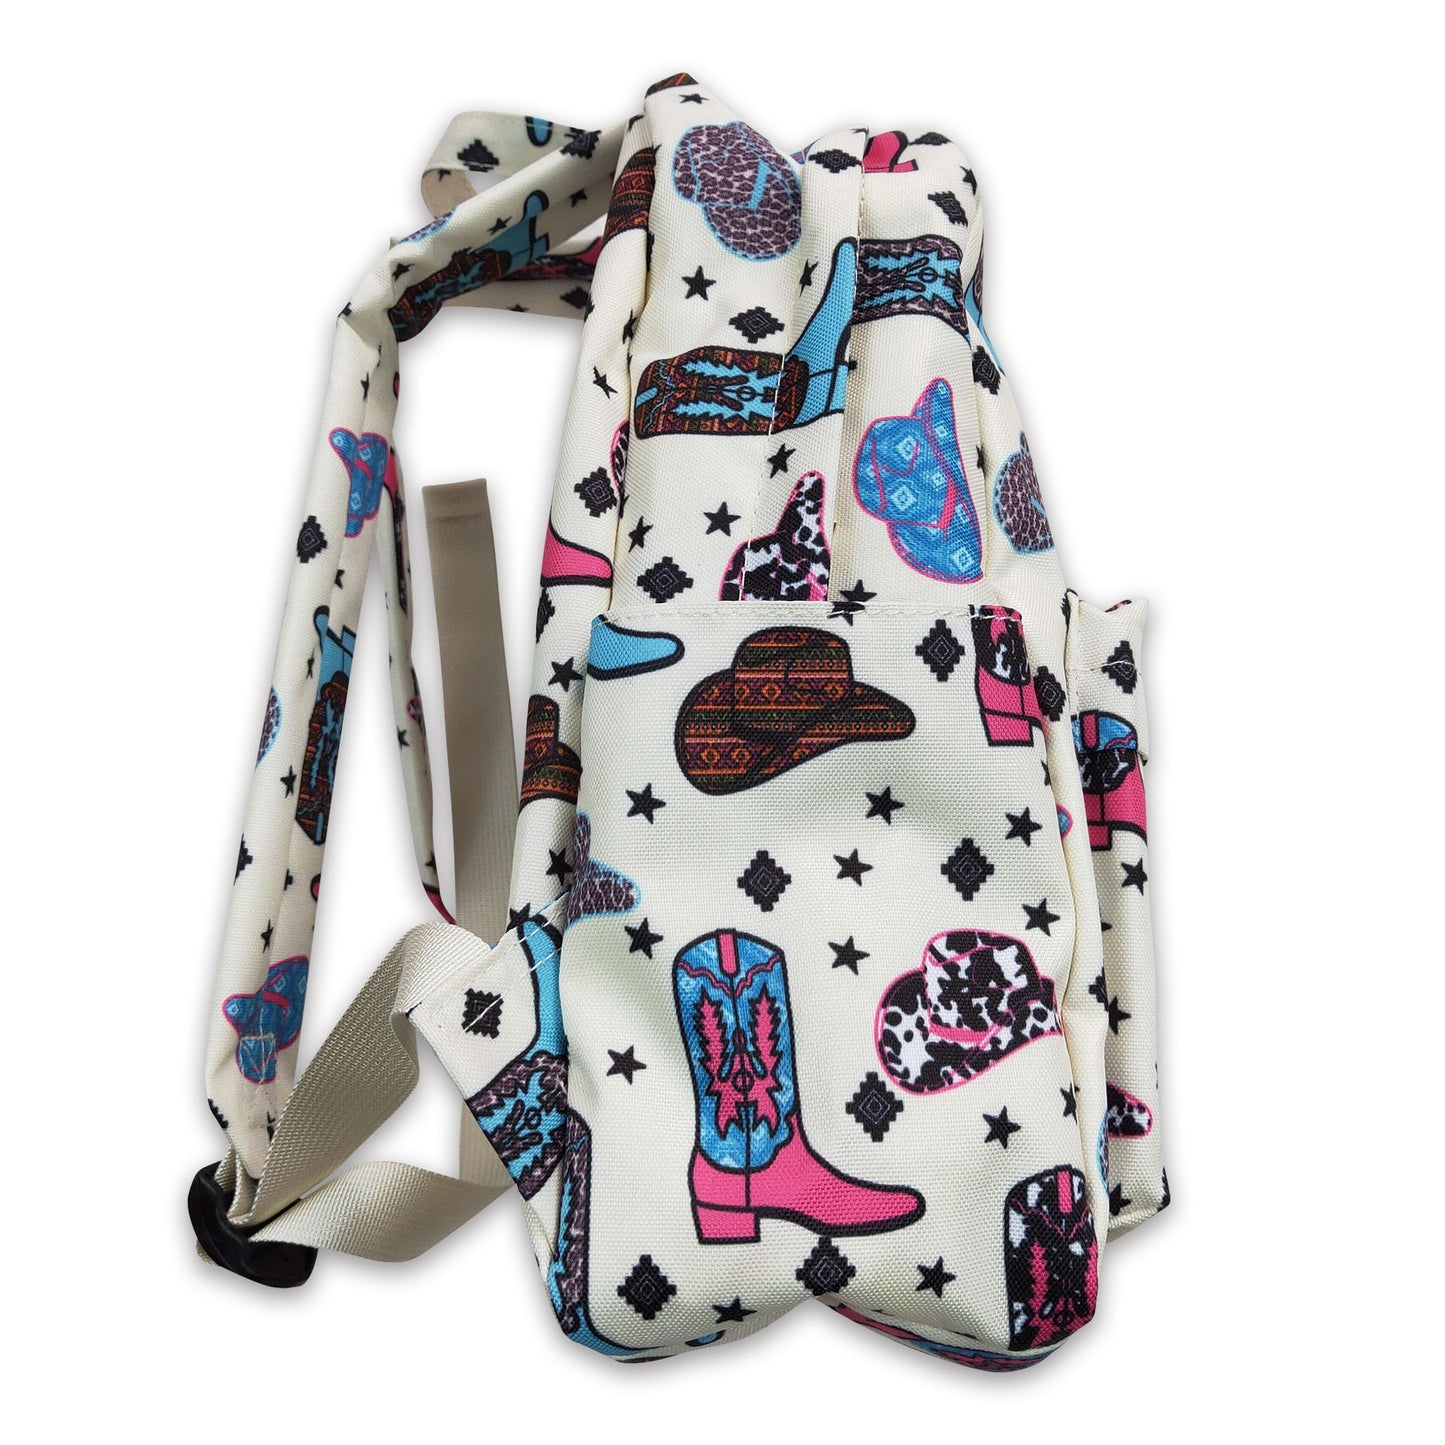 Boots hats western backpack kids girls back to school bags